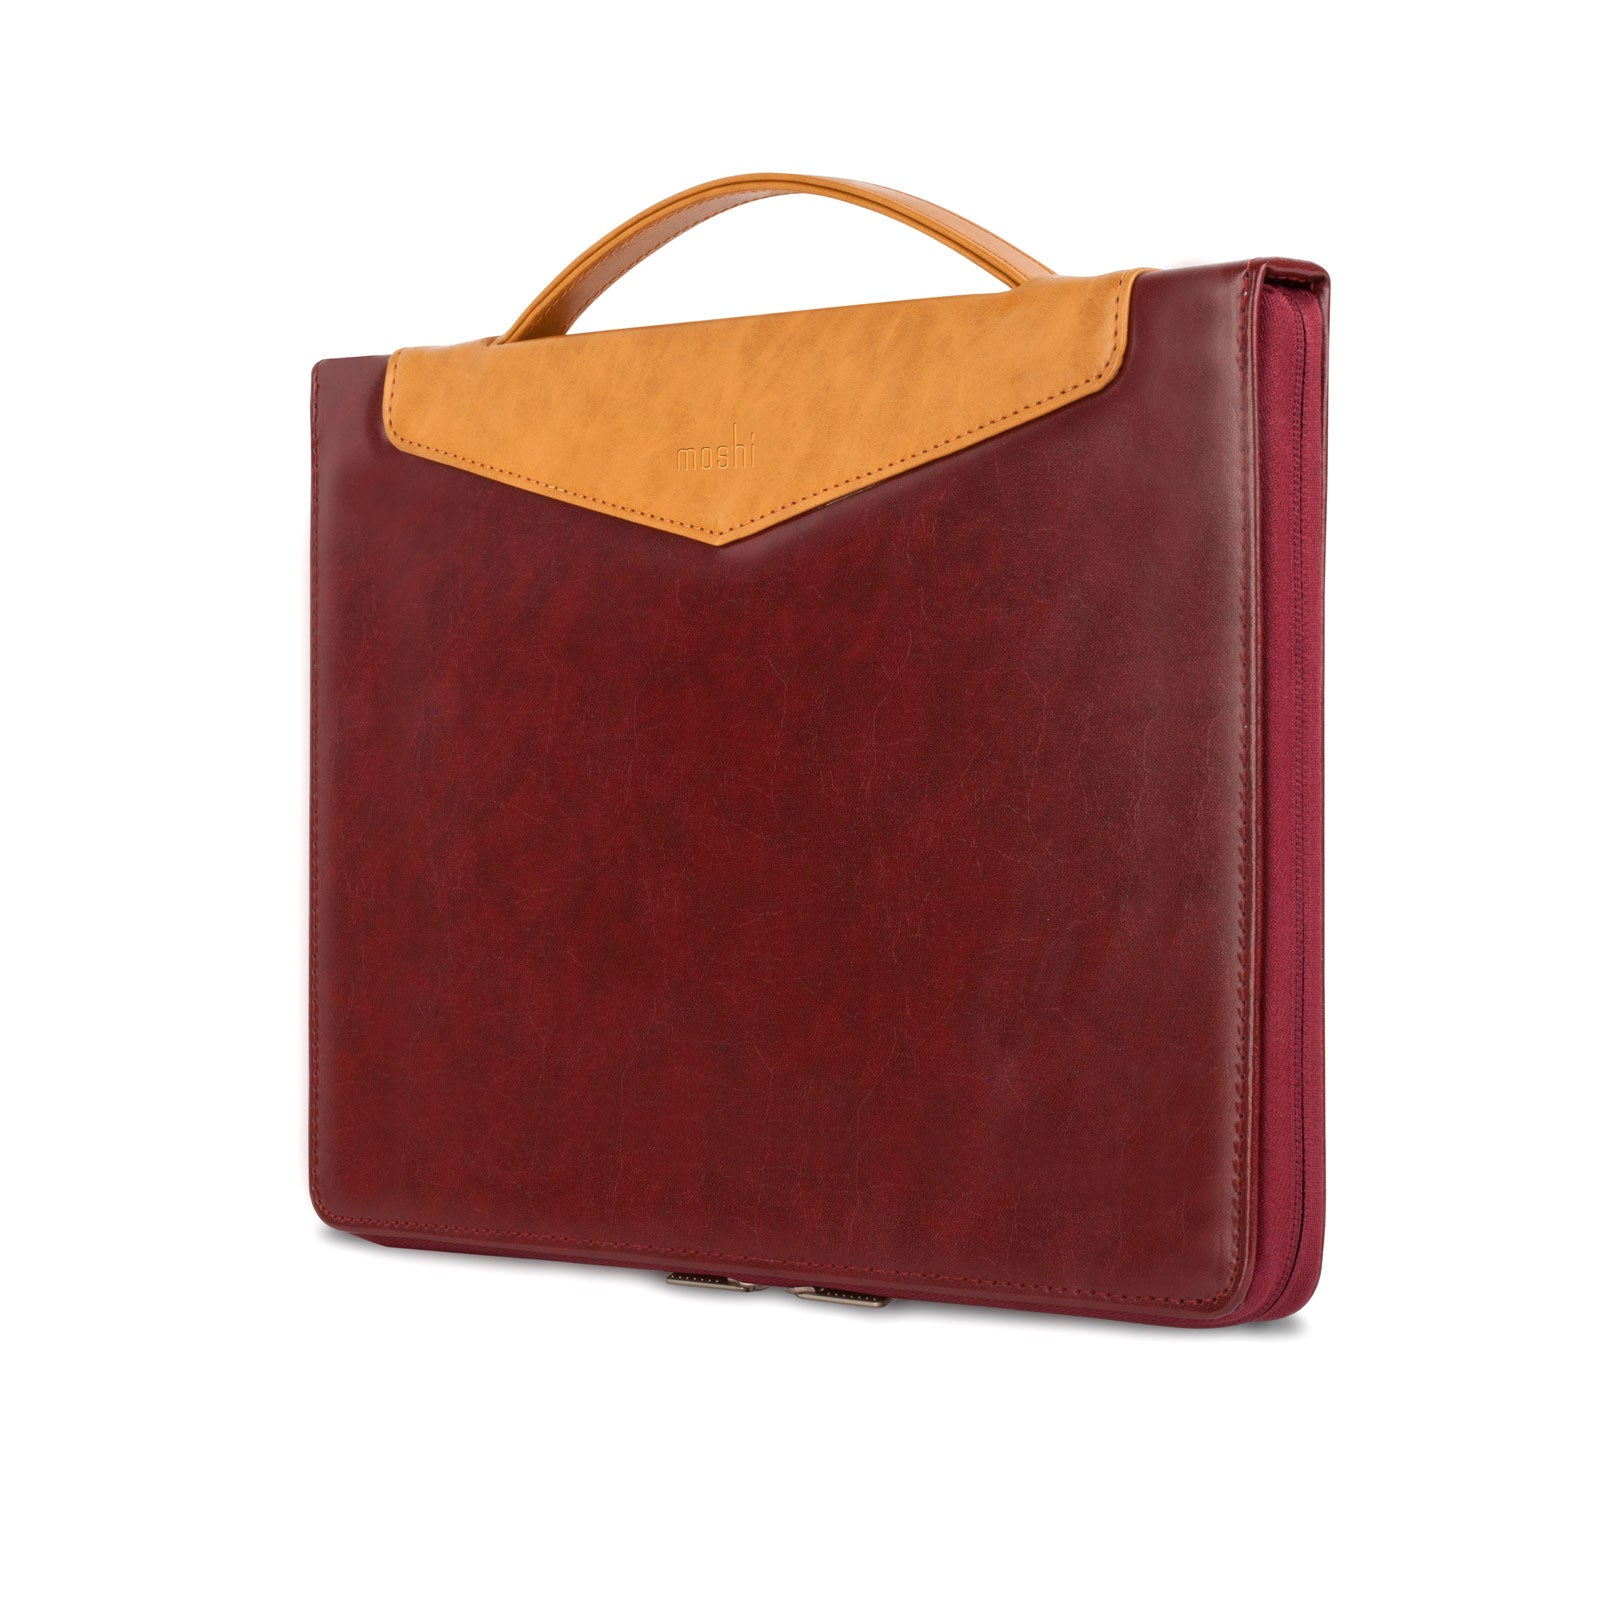 Moshi Codex 13" Protective Carrying Case for MacBook